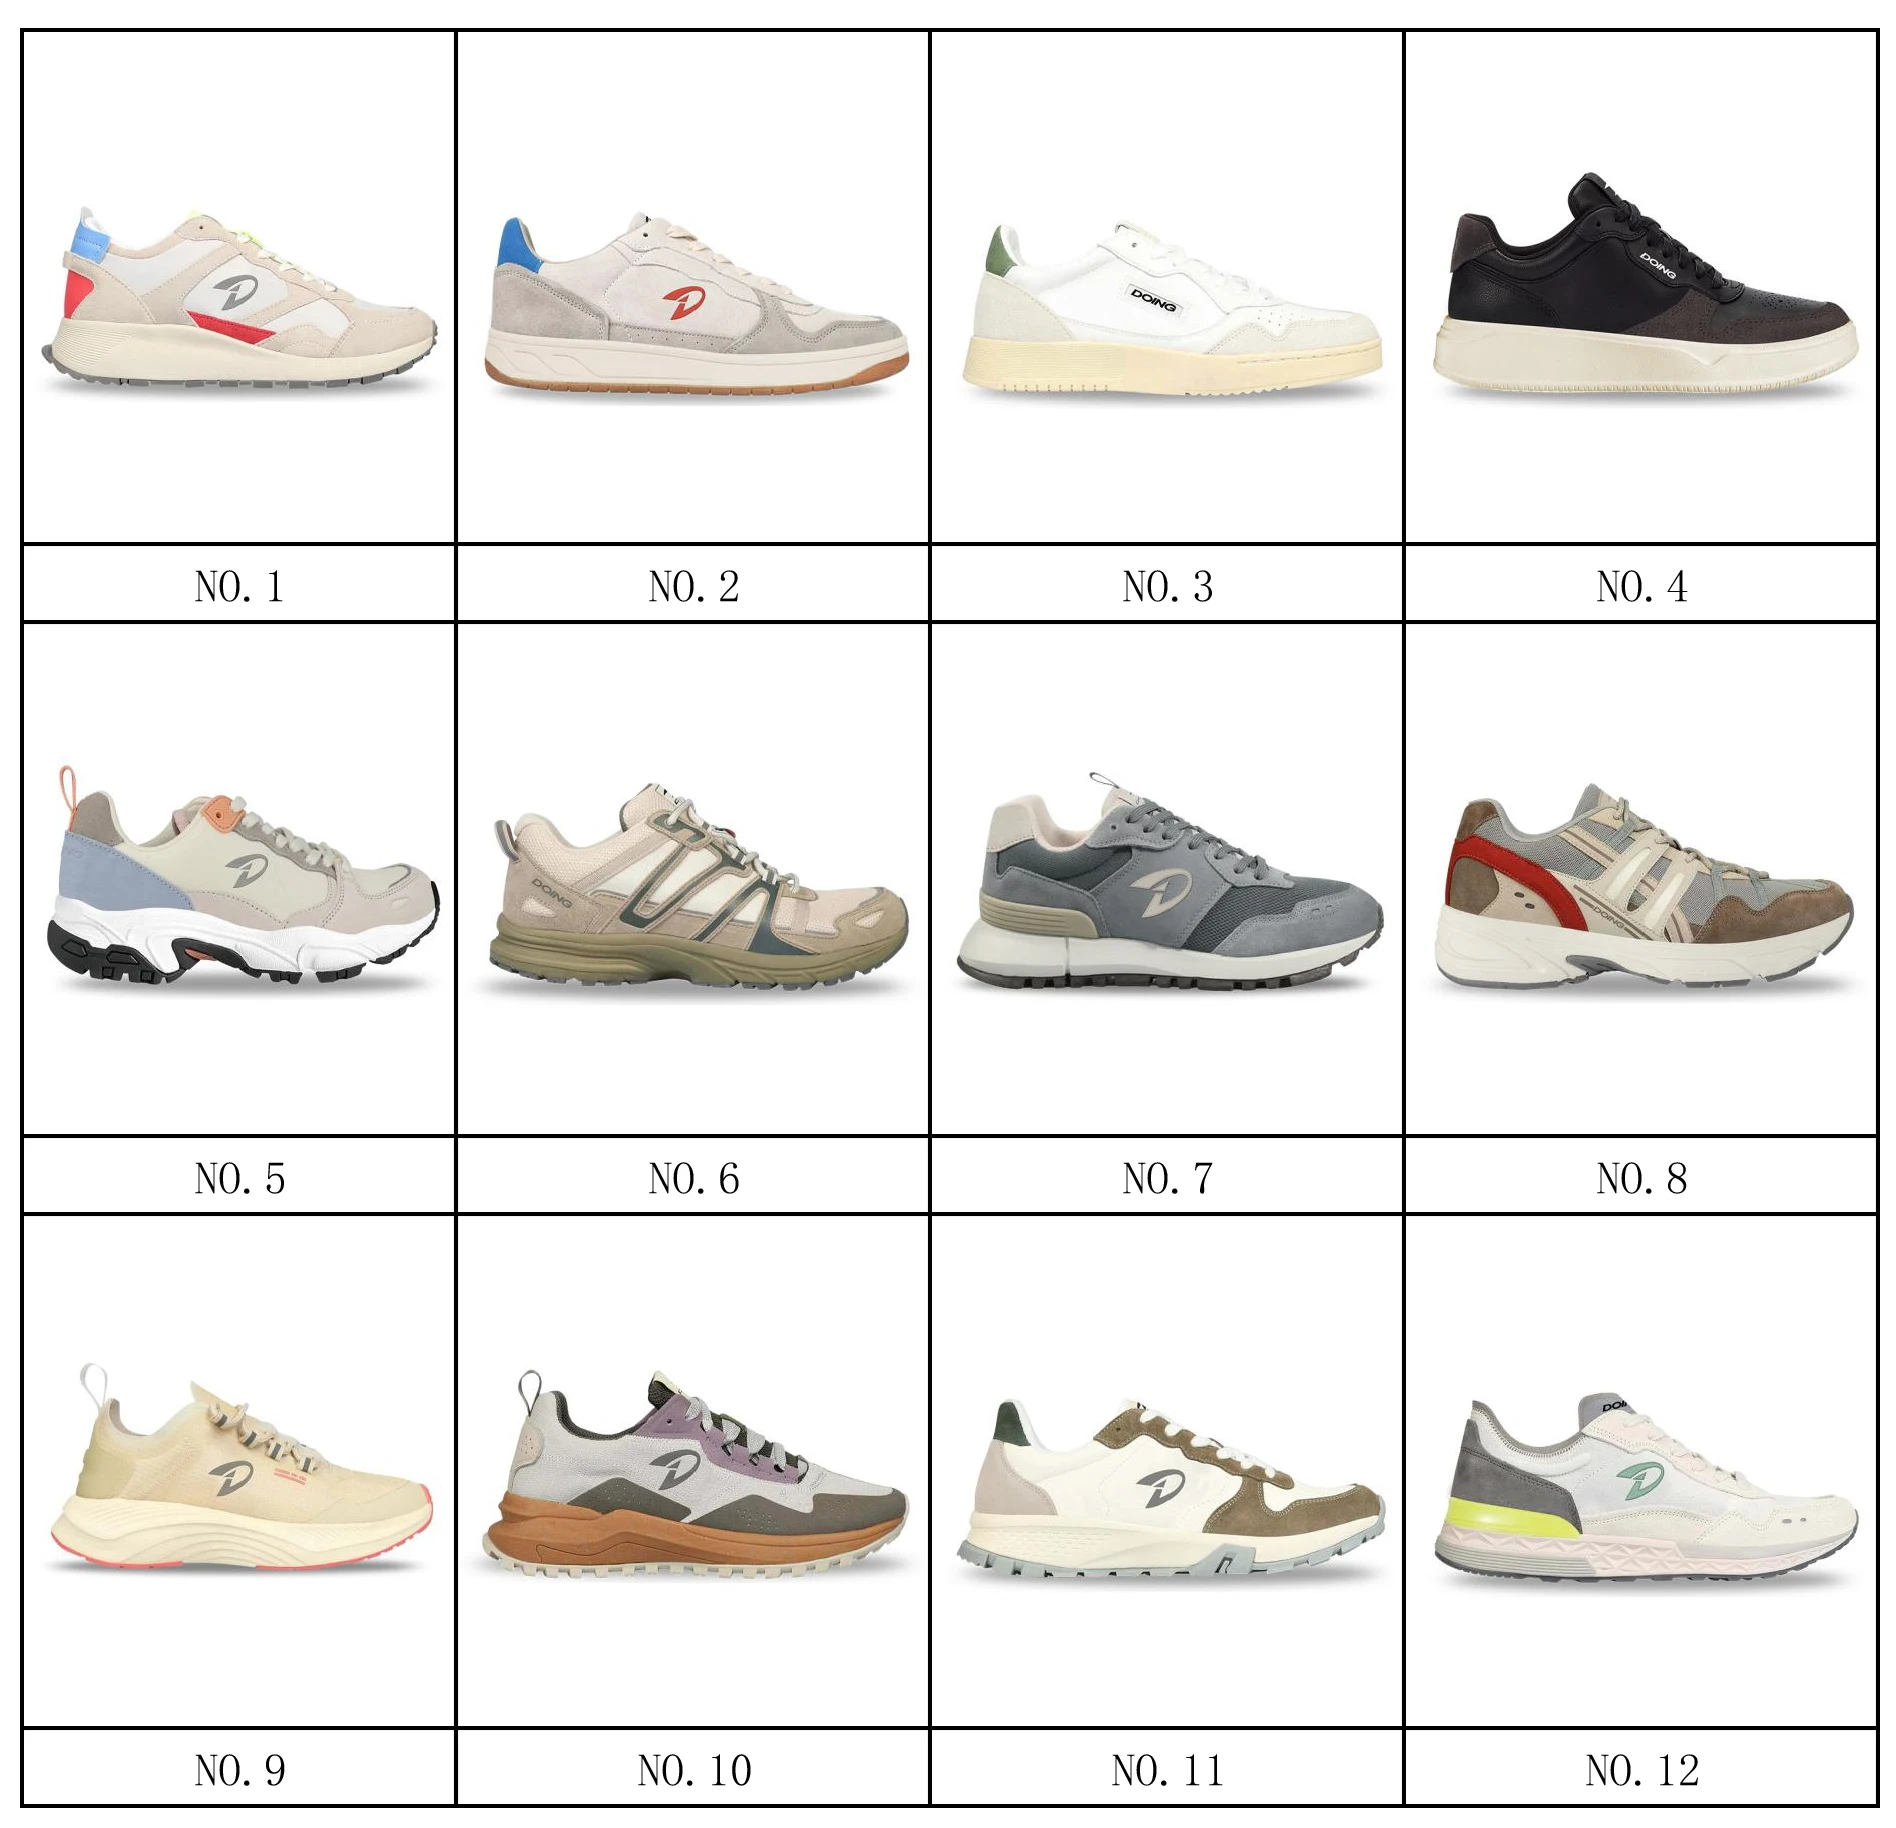 OEM/ODM Shoe Factory New Arrivals Designer Breathable Retro Unisex Men Sports Casual Fitness Walking Sneakers Shoes Running